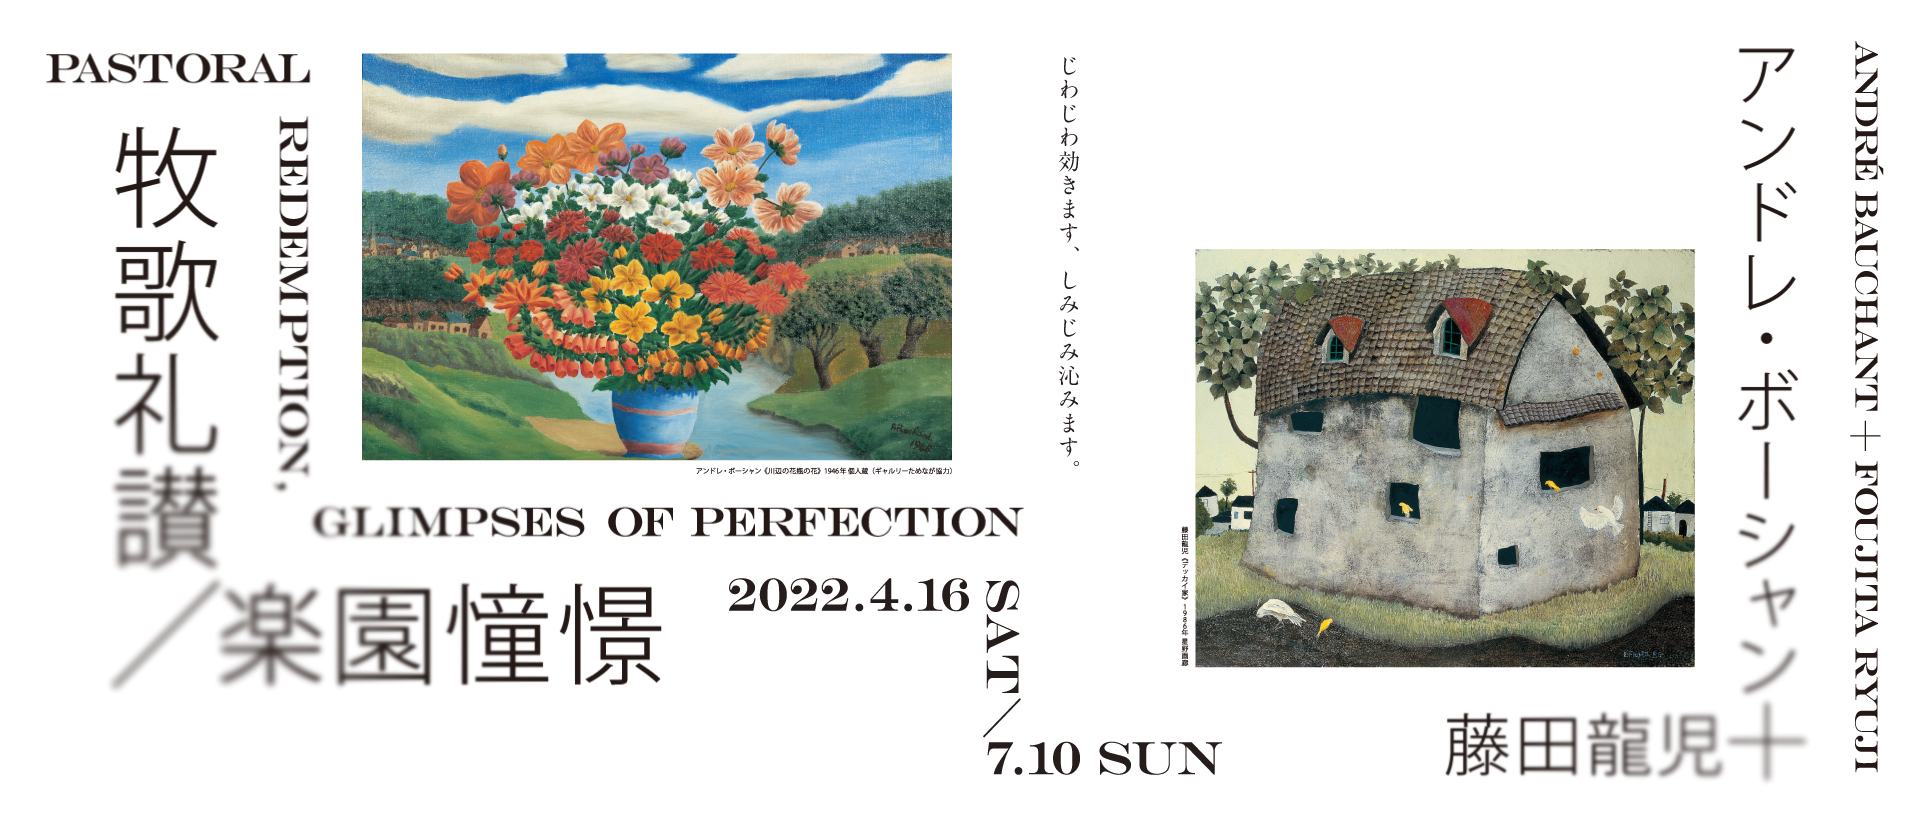 Pastoral Redemption, Glimpses of Perfection André Bauchant + Foujita Ryuji